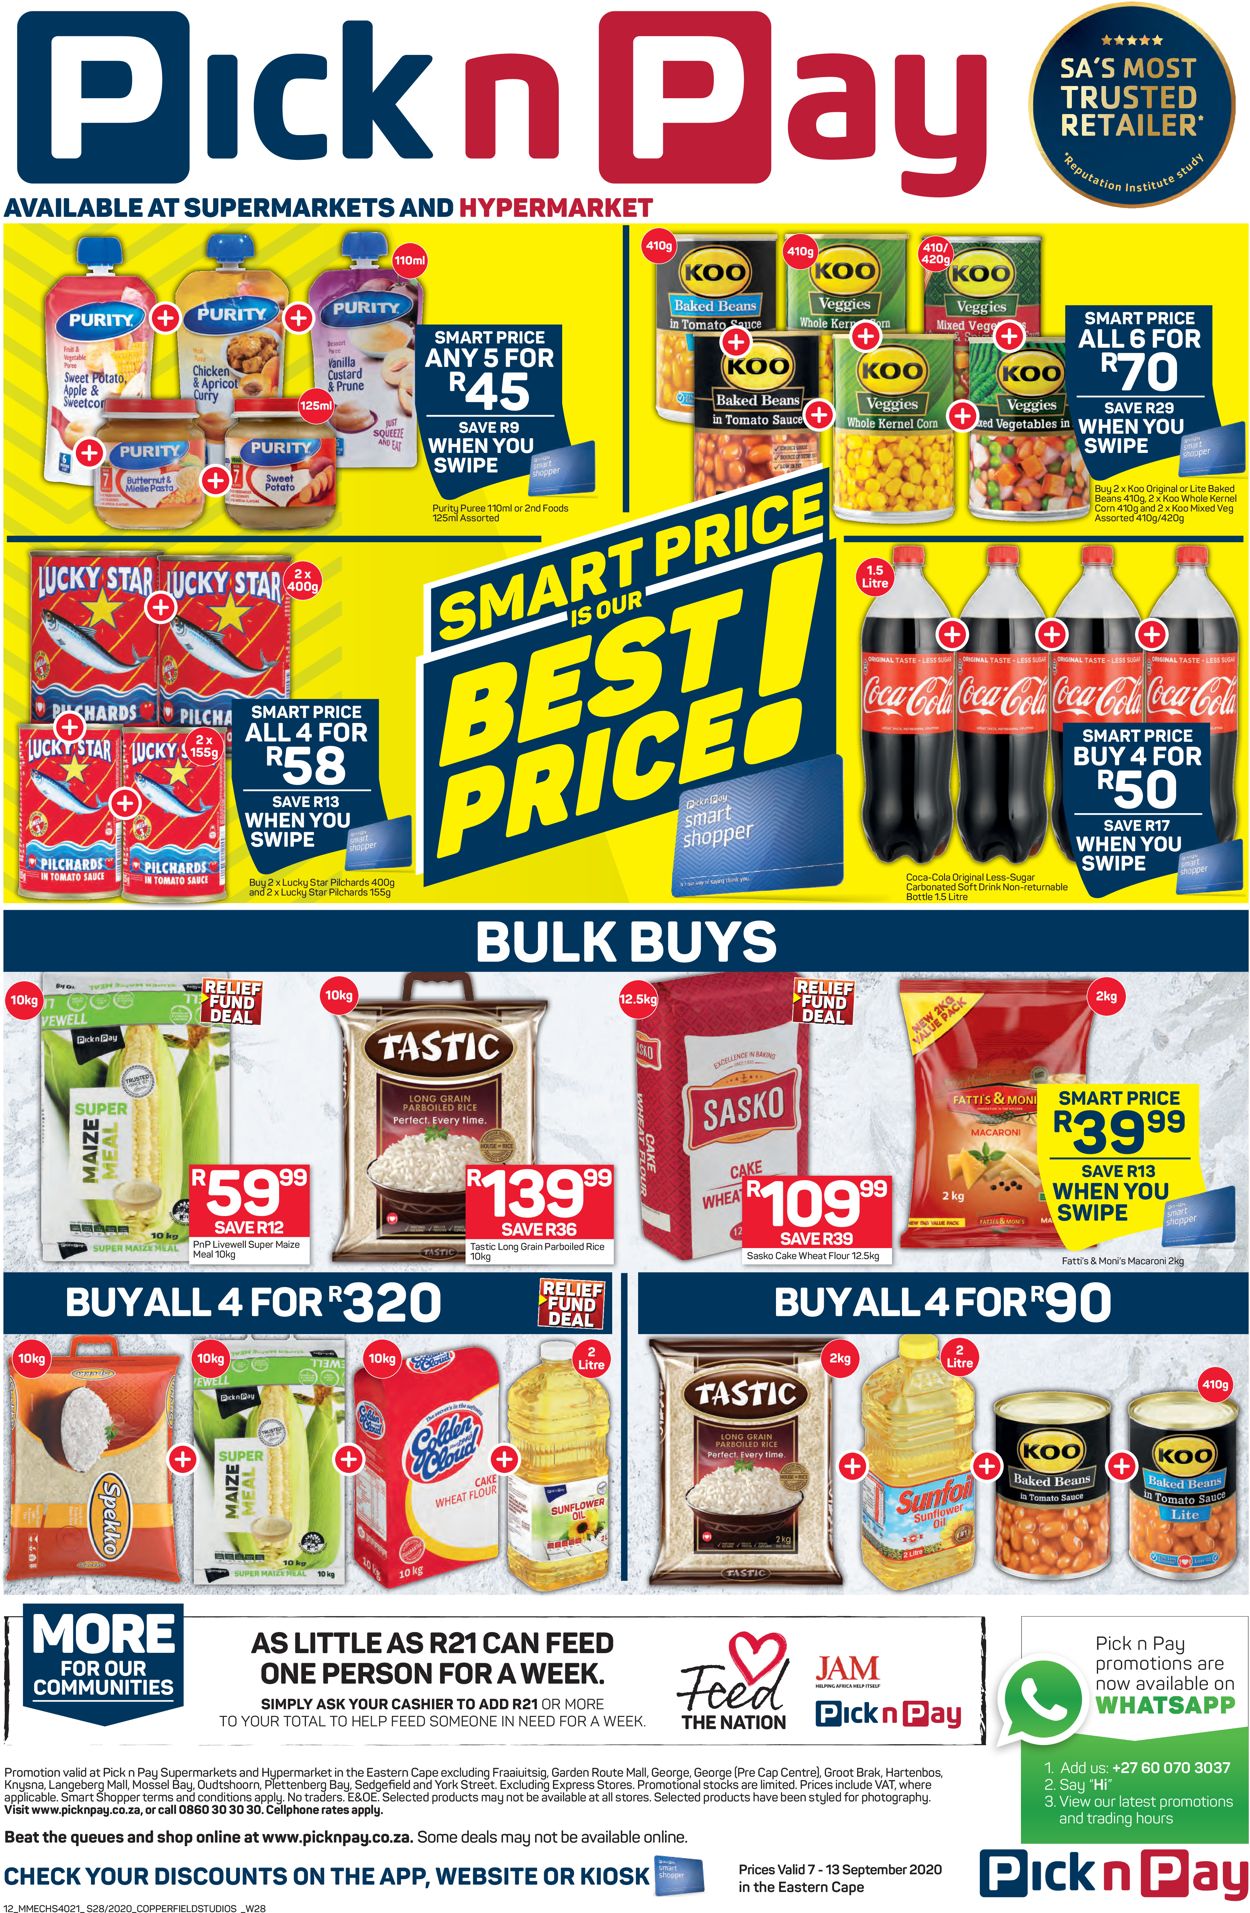 Pick n Pay Current catalogue 2020/09/07 2020/09/13 [12]